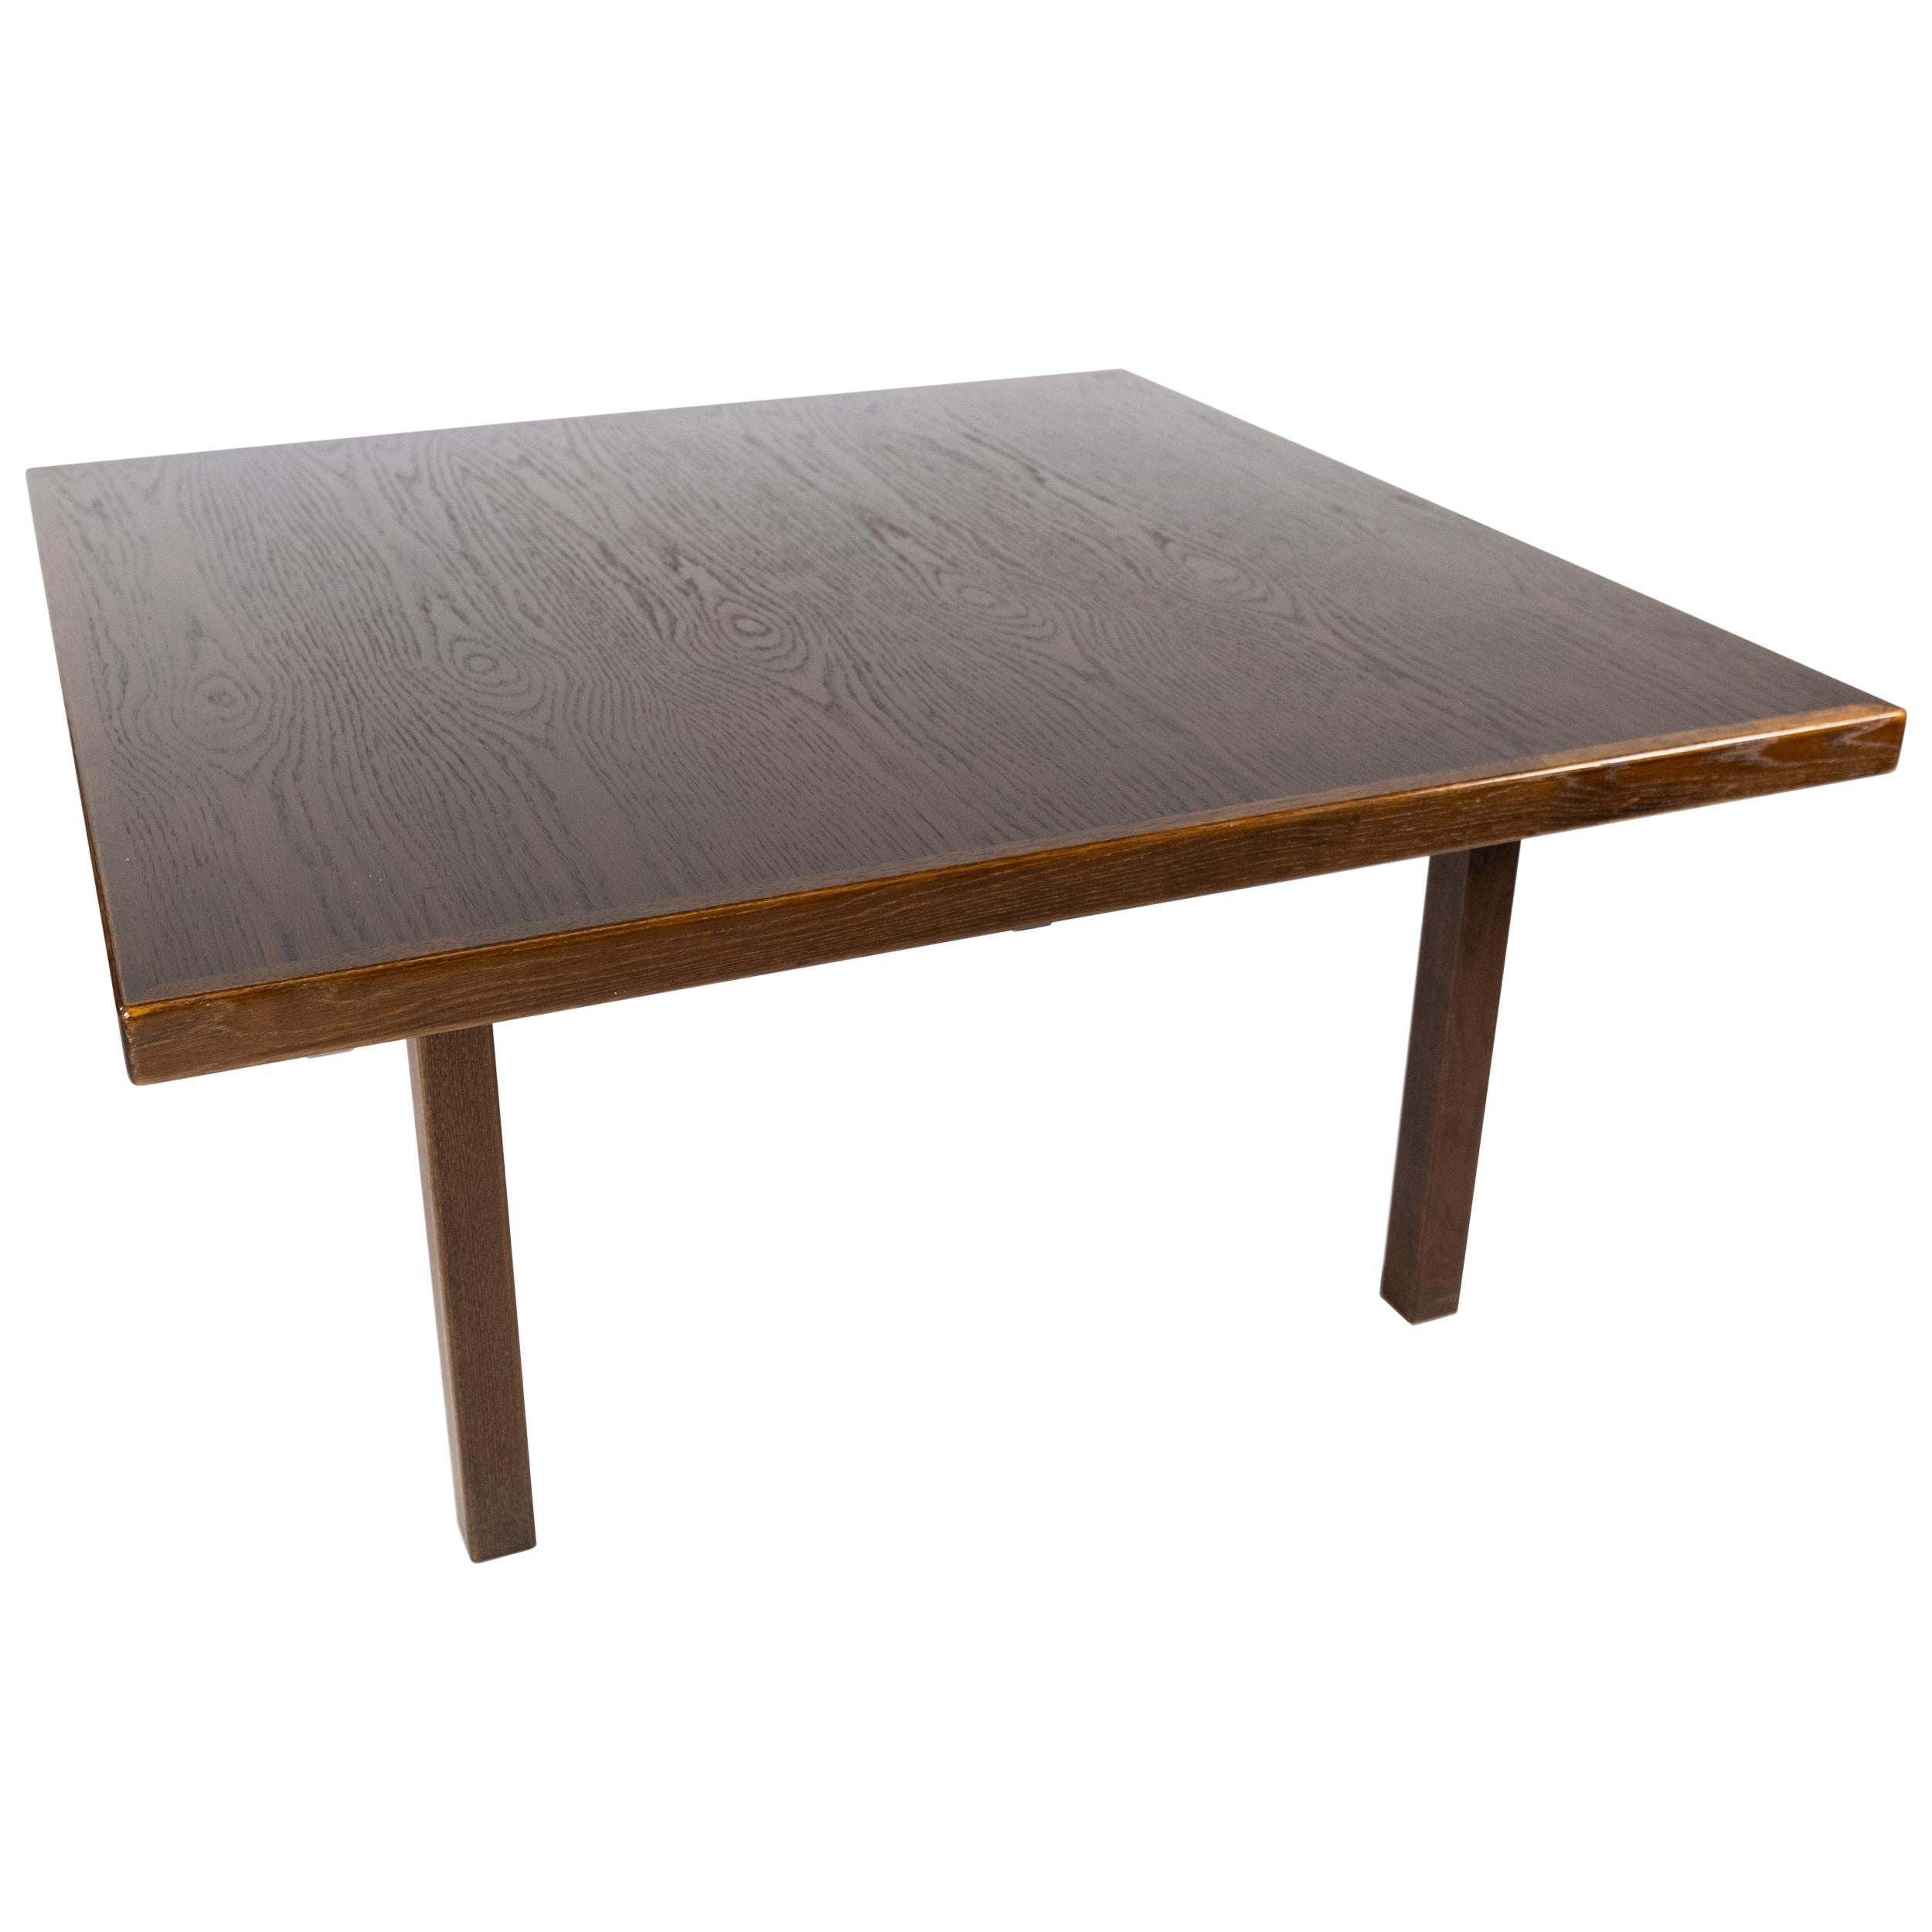 Coffee Table Made In Dark Oak, Danish Design From 1960s For Sale